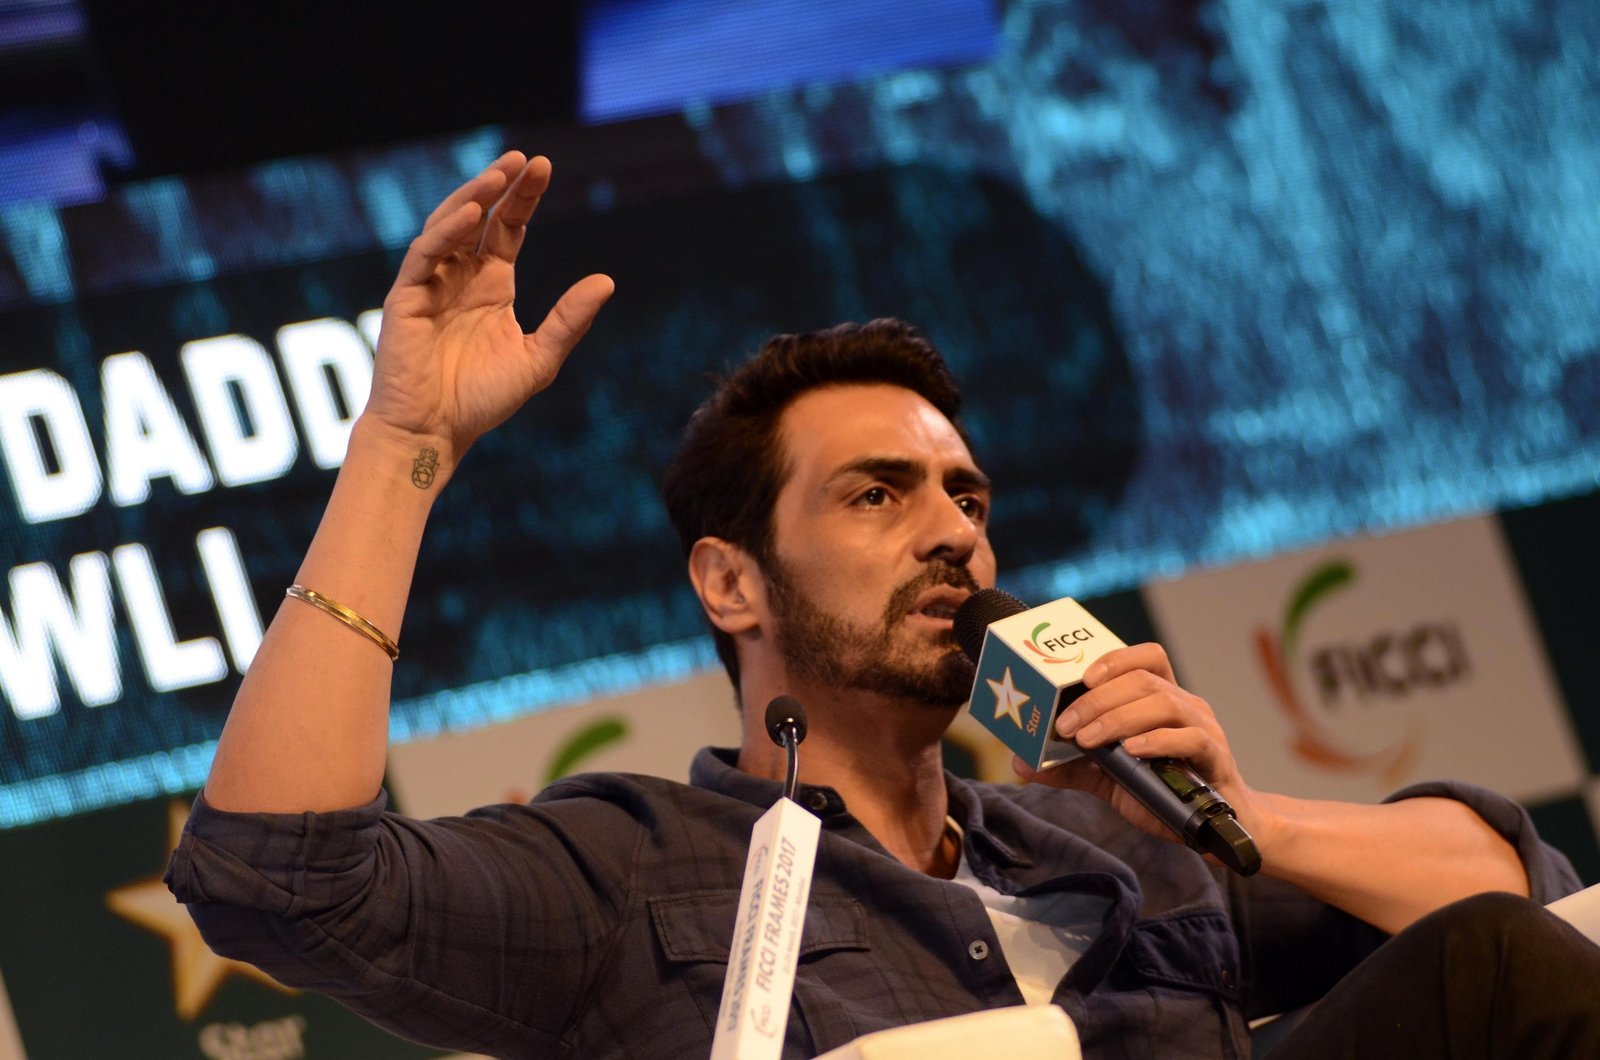 Arjun Rampal at FICCI Event Photos | Picture 1486208